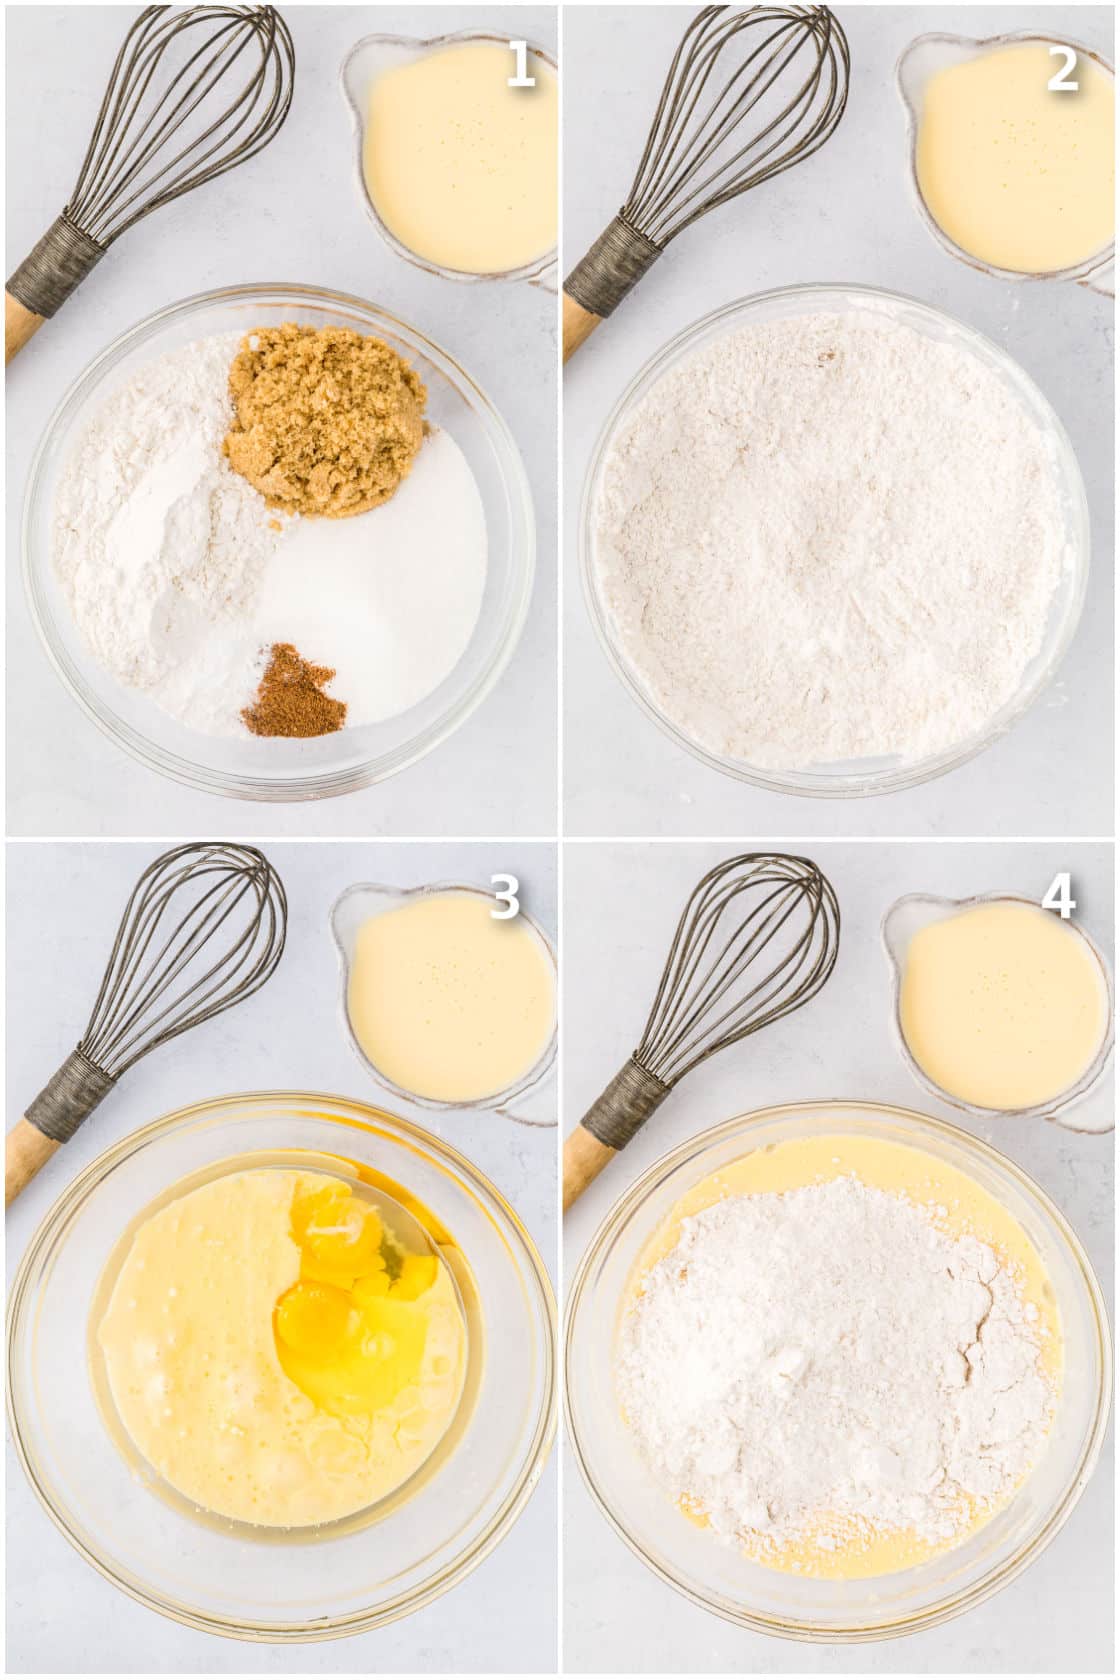 Process shots showing how to combine dry and wet ingredients to make cake batter.